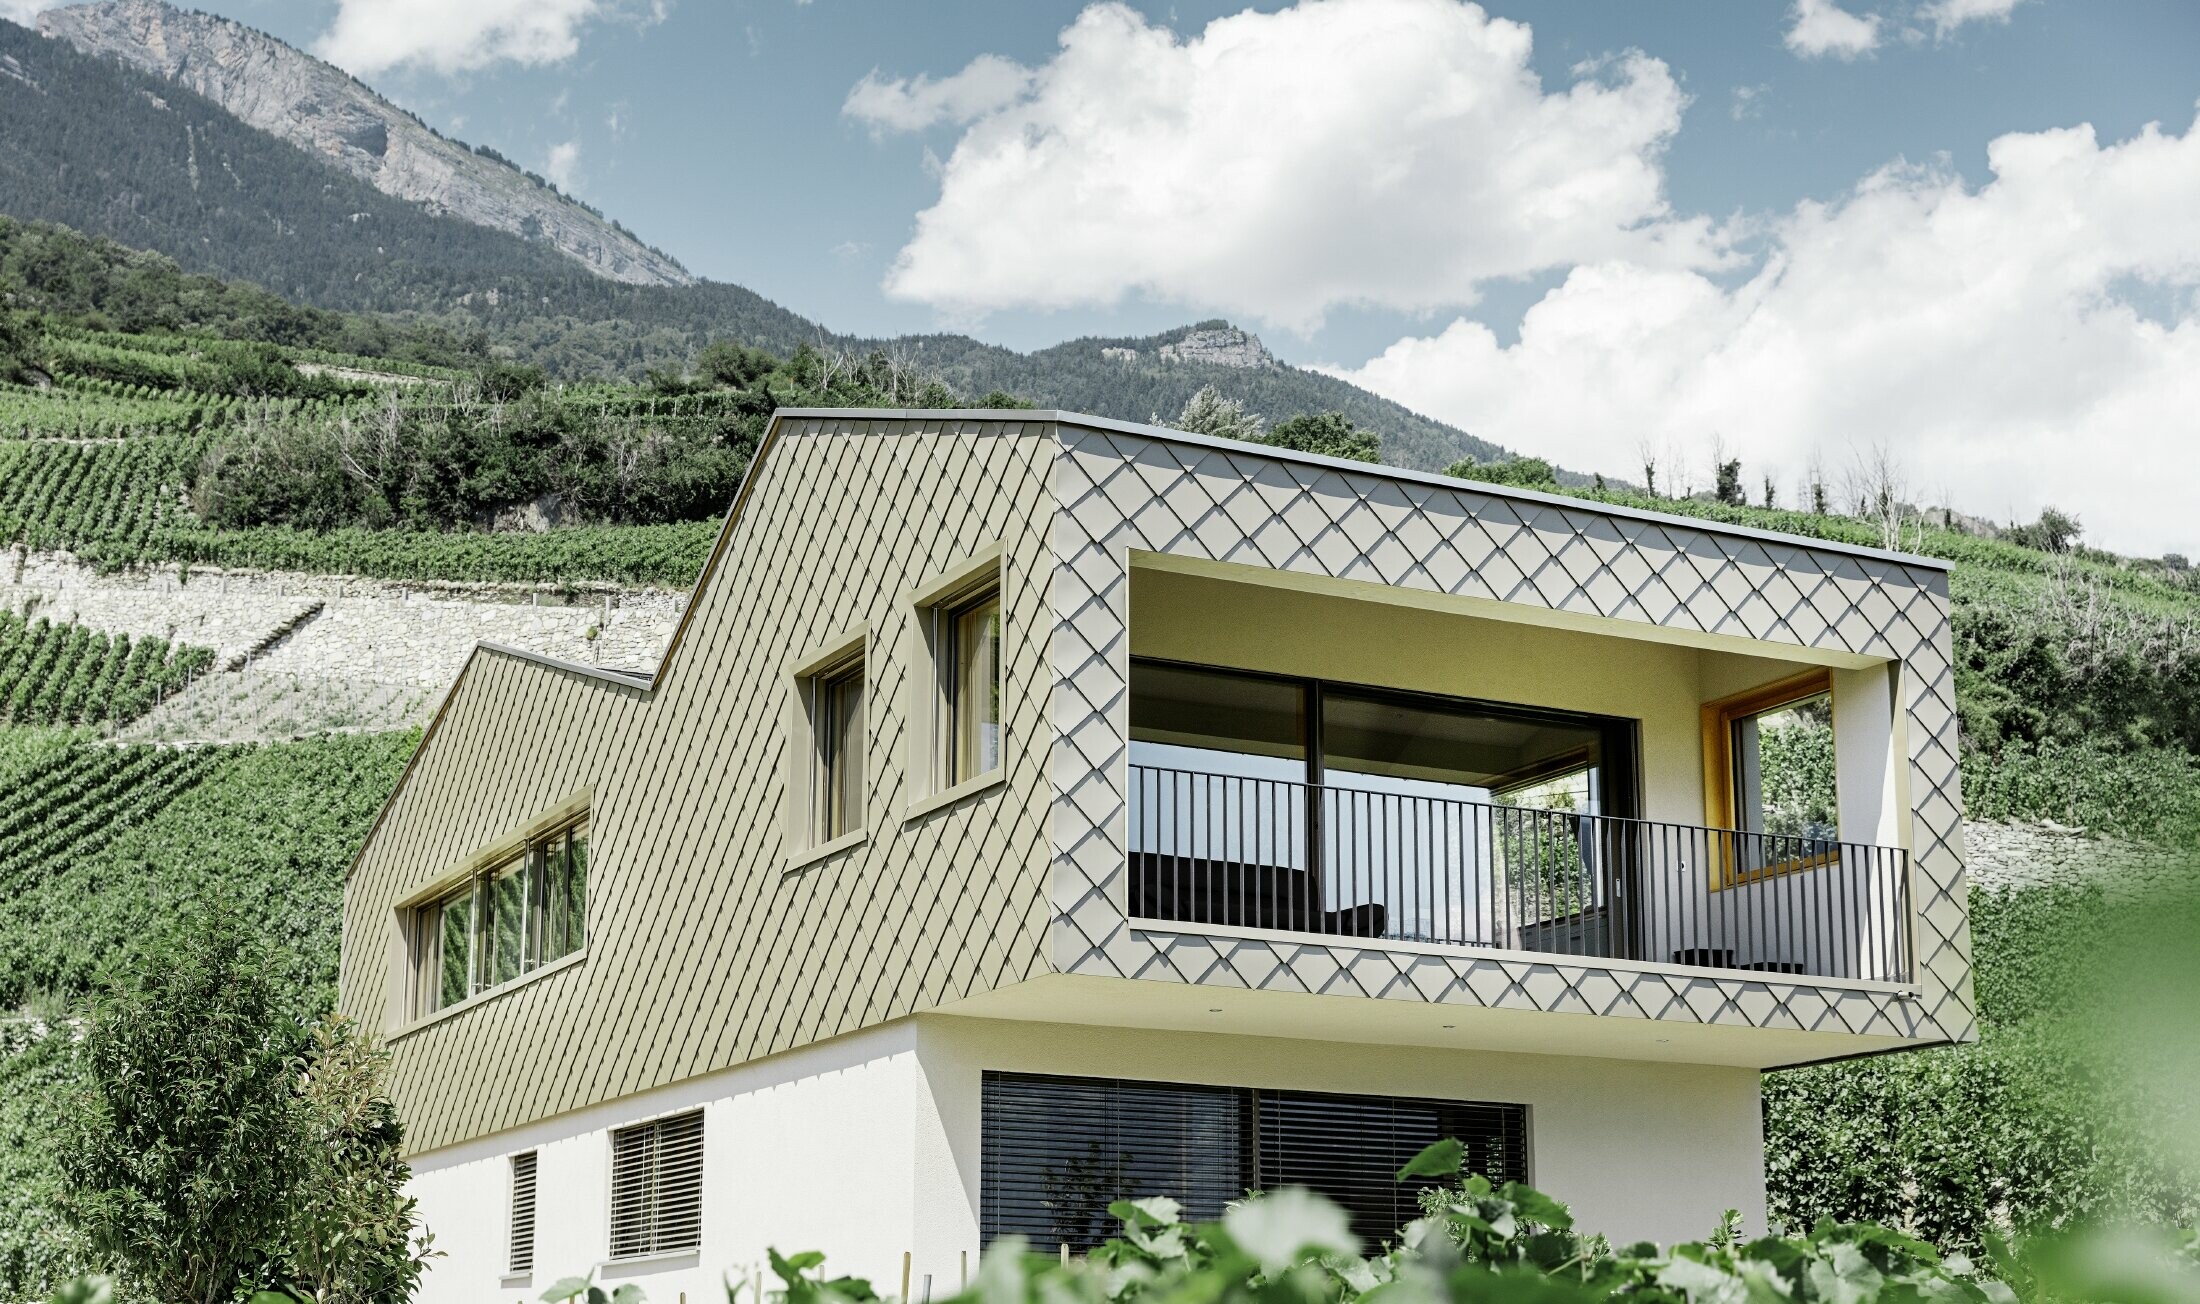 Modern detached house set in the heart of the Rhone valley vineyards with four different roof surfaces and an open gallery clad with rhomboid façade tiles in bronze